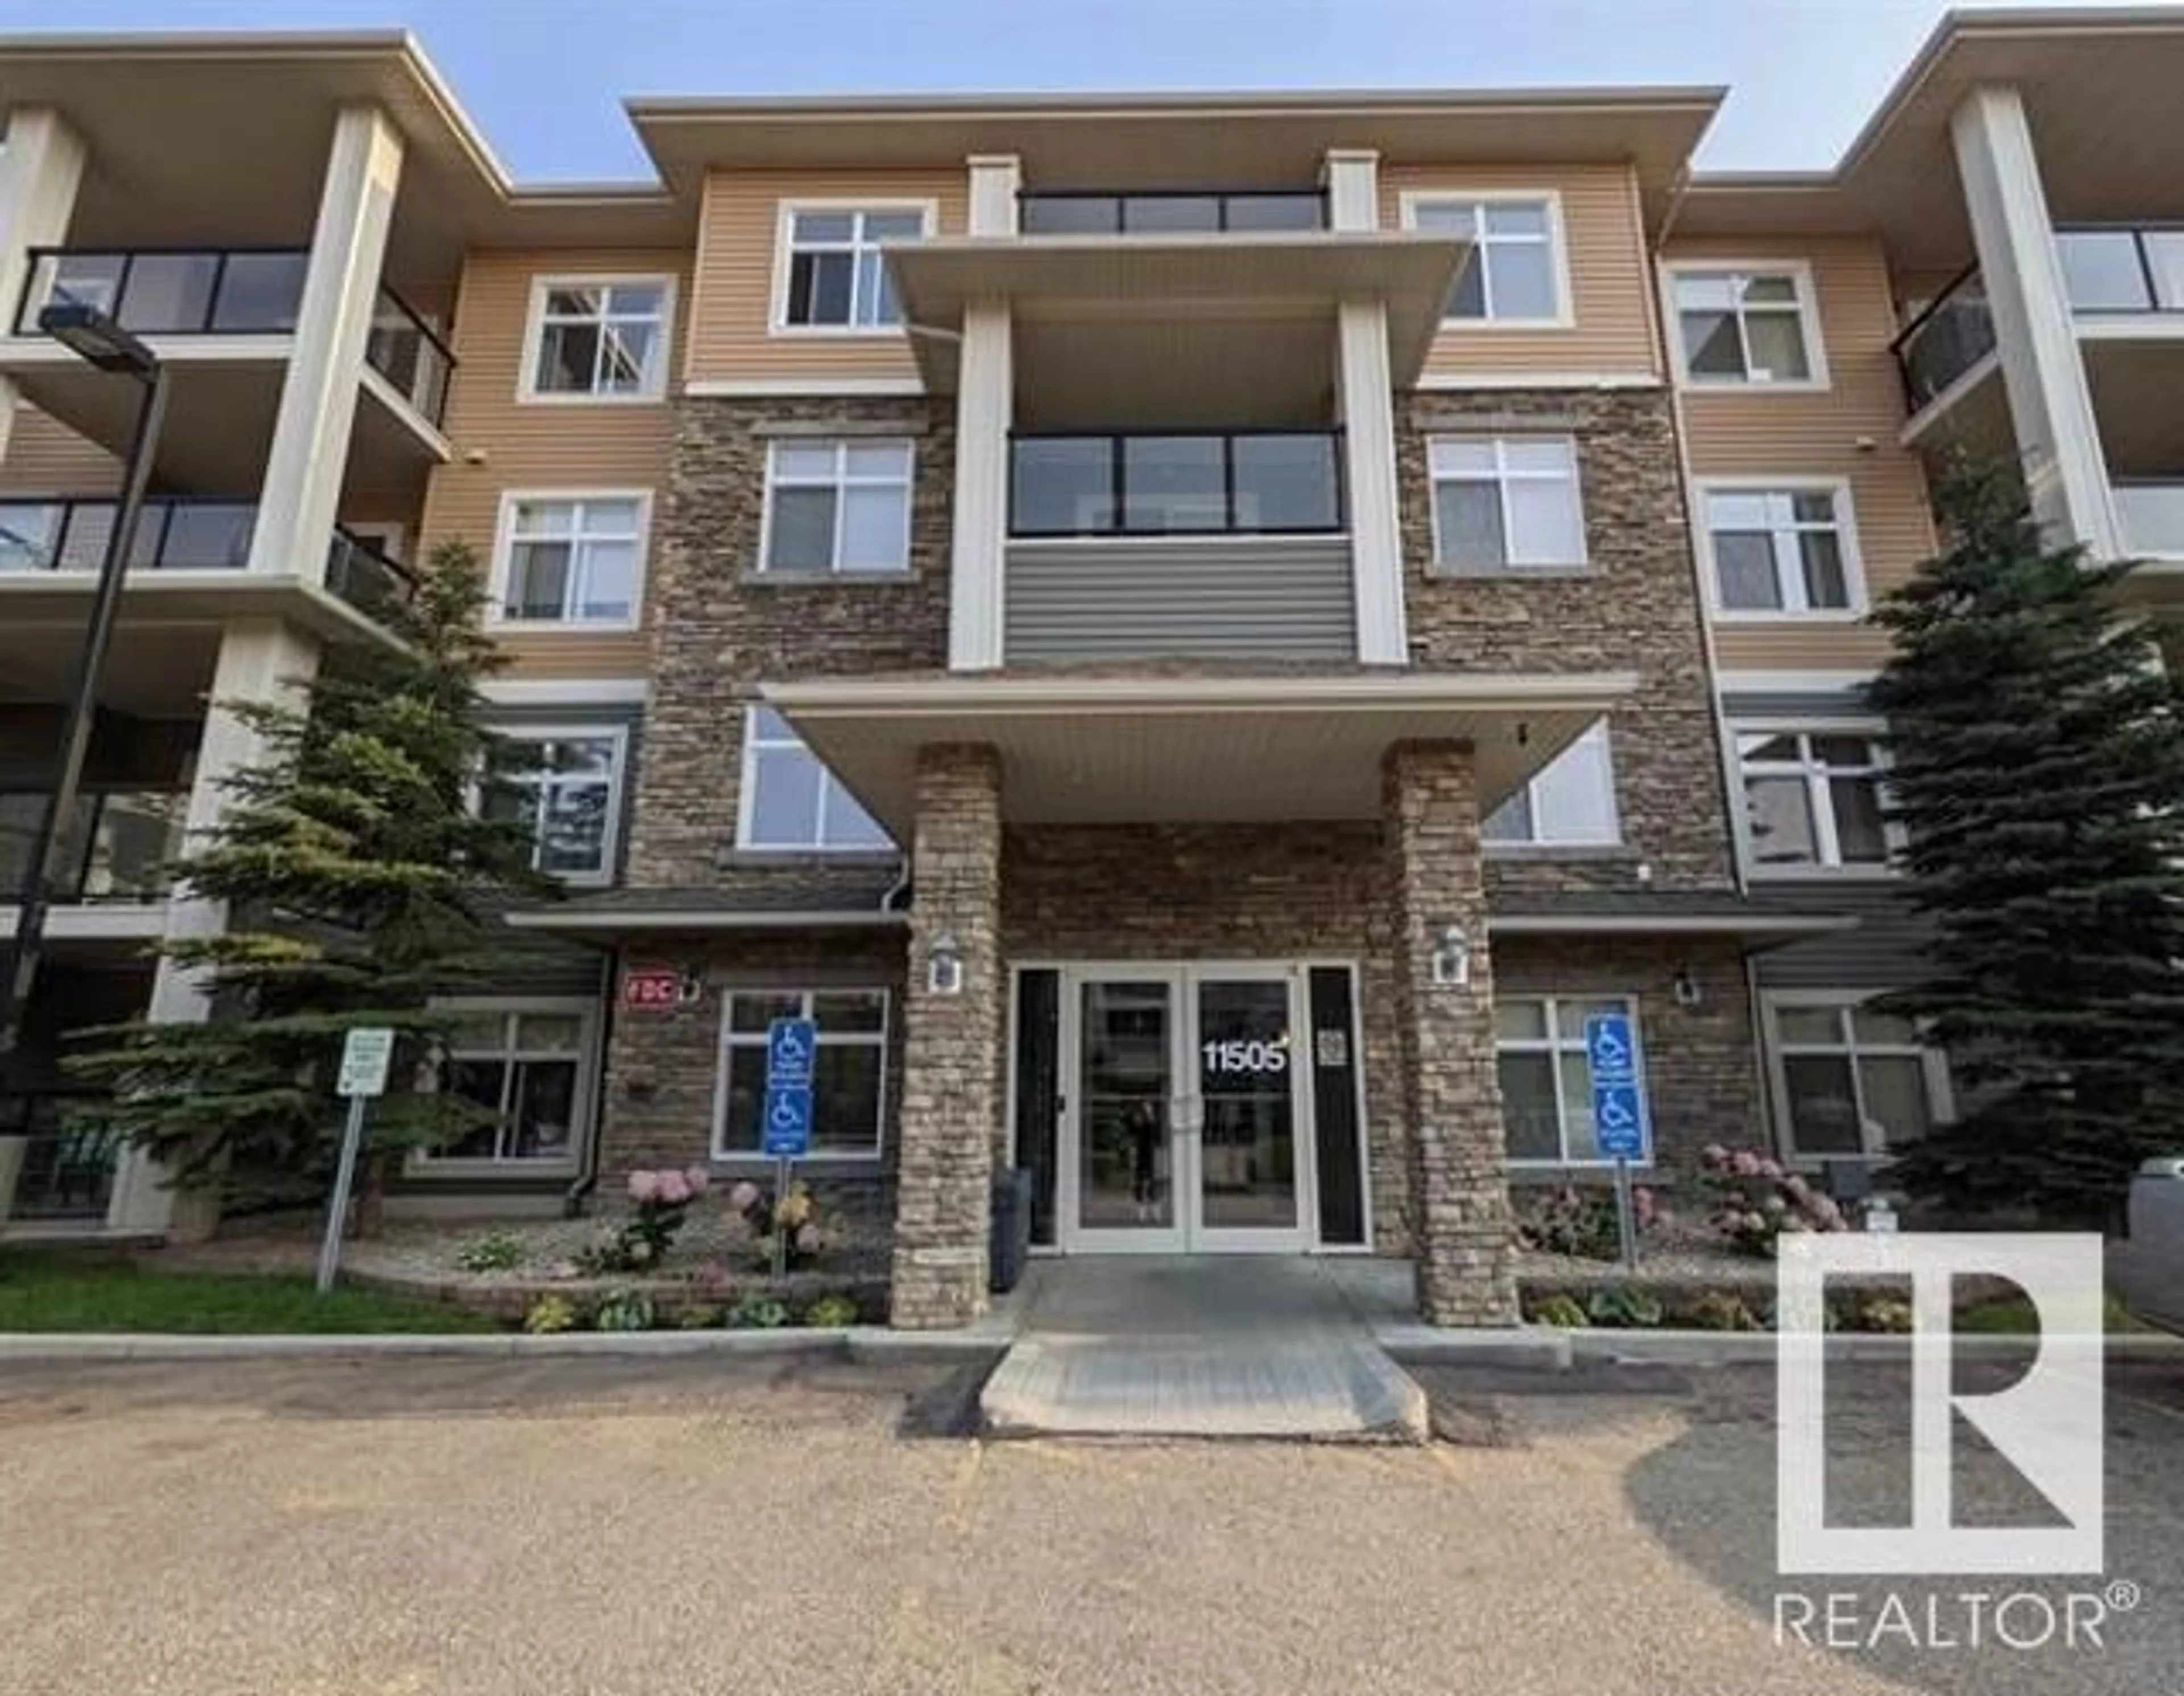 A pic from exterior of the house or condo for #146 11505 ELLERSLIE RD SW, Edmonton Alberta T6W2A9